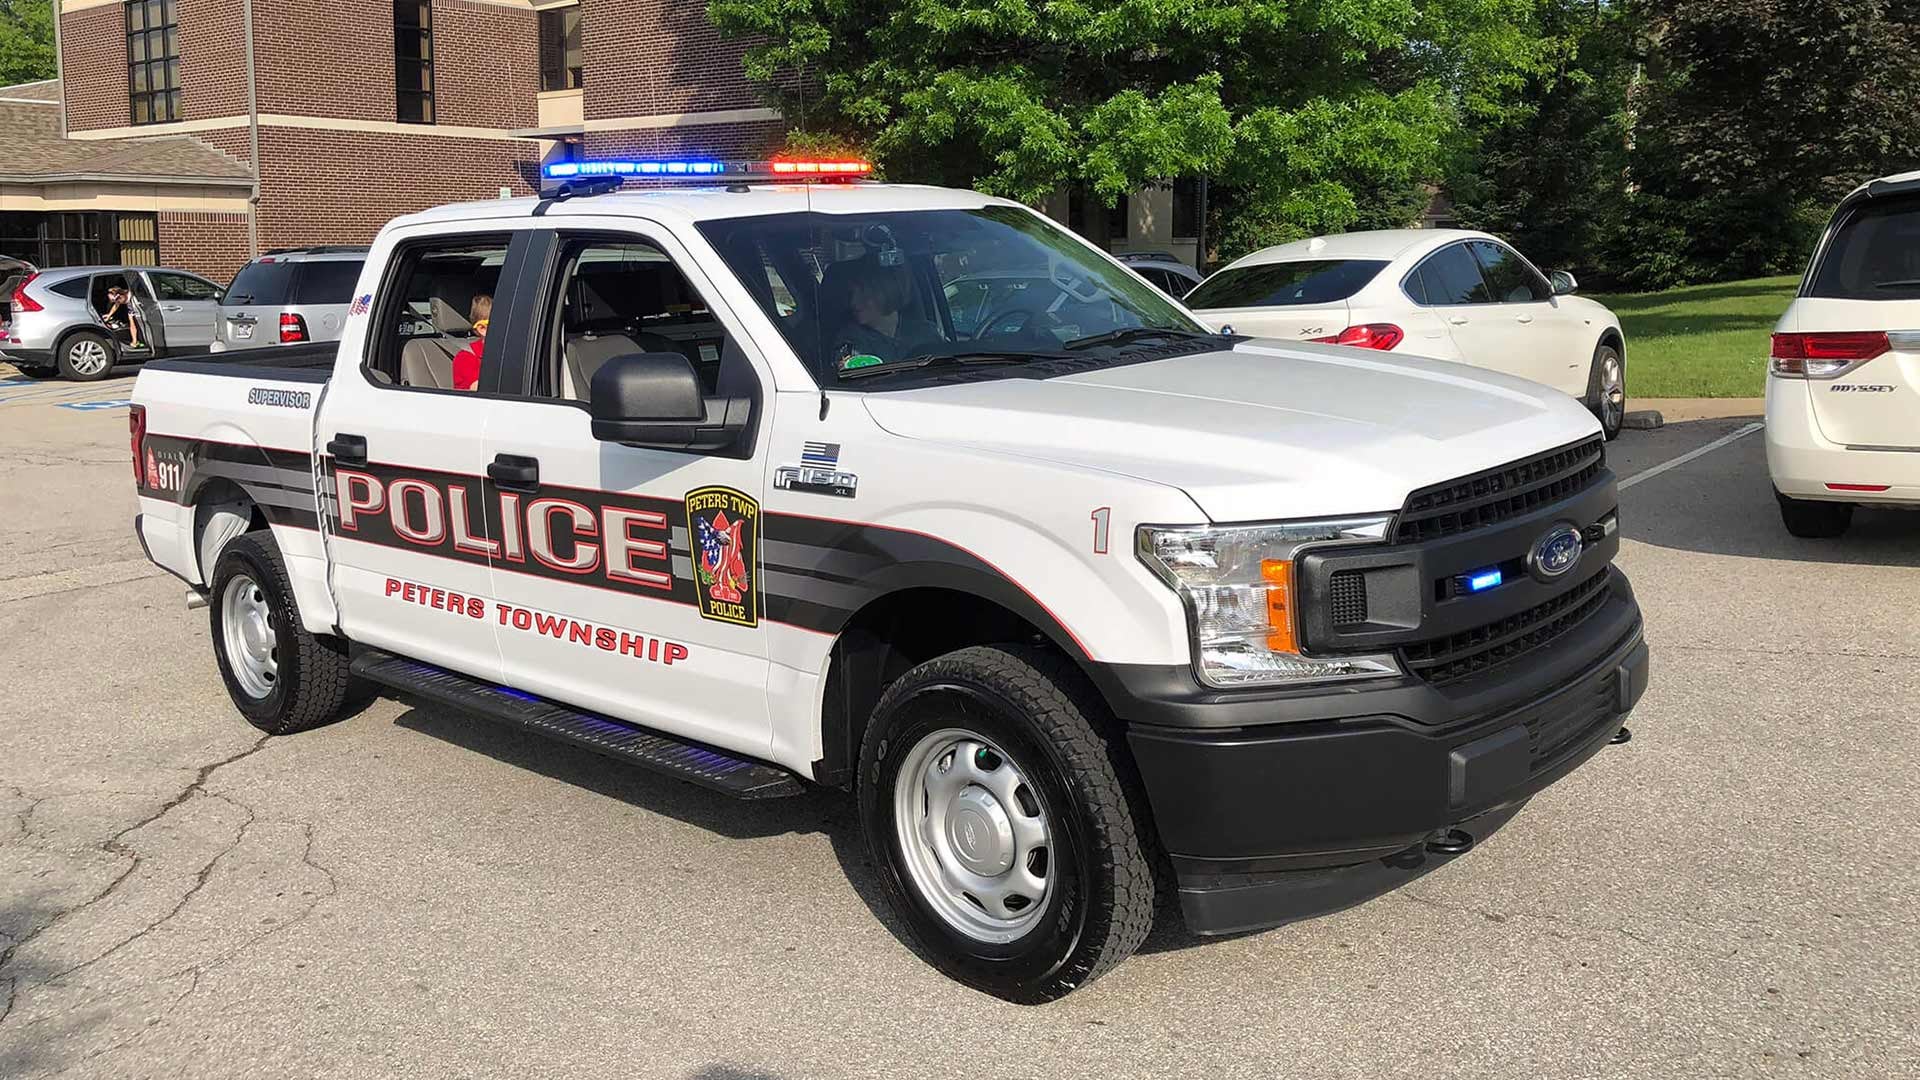 Peters Township Police